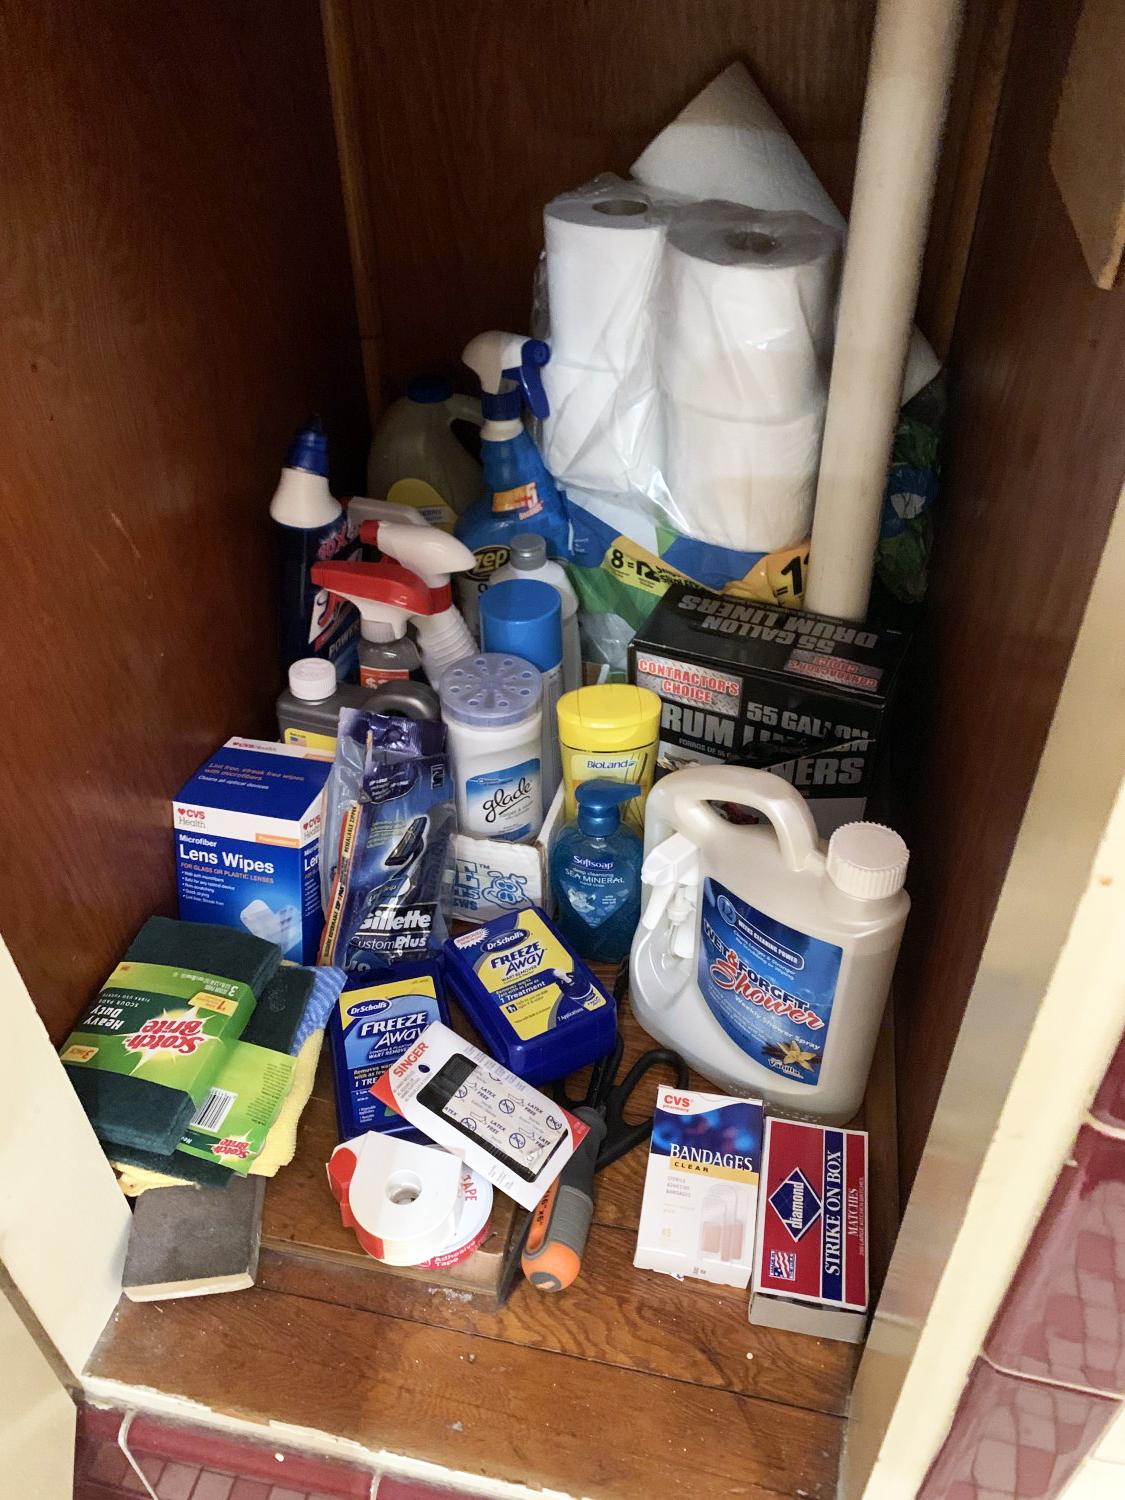 Group lot of assorted bathroom items